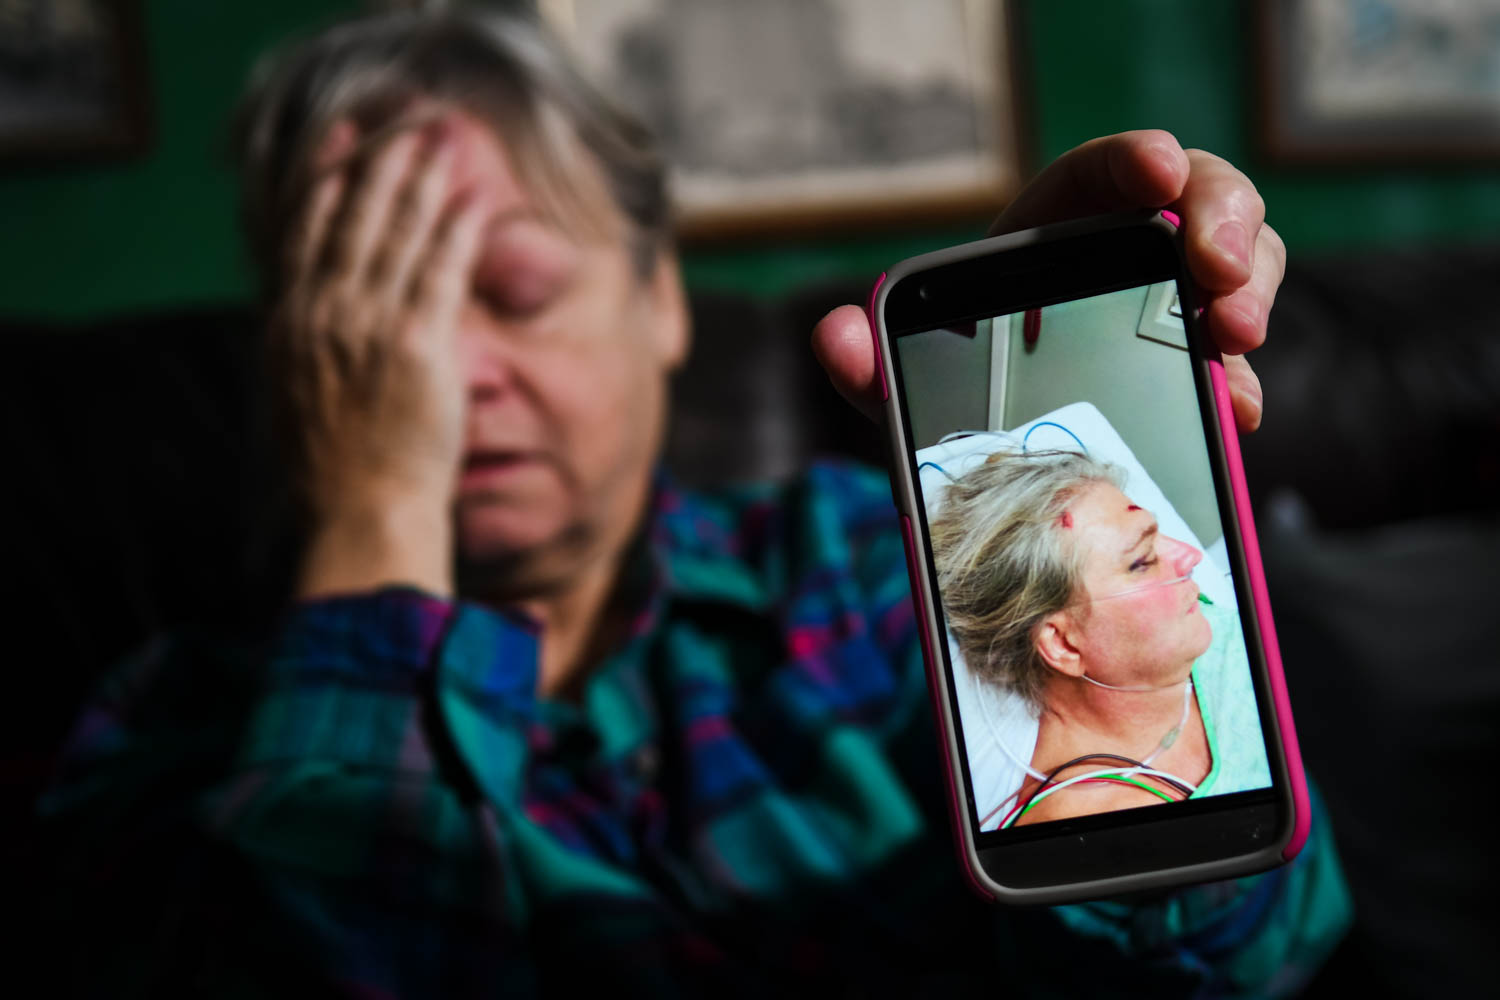 Dee Robbins, of Rock Island, is overcome by emotion on Thursday while holding up a photograph of Kevin Parker, her longtime boyfriend, lying in the hospital after he was the victim of an intentional hit-and-run accident. Mr. Parker sustained a collapsed right lung, bleeding on the brain, mutiple rib fractures, and a fractured spine. He also suffered memory loss. 